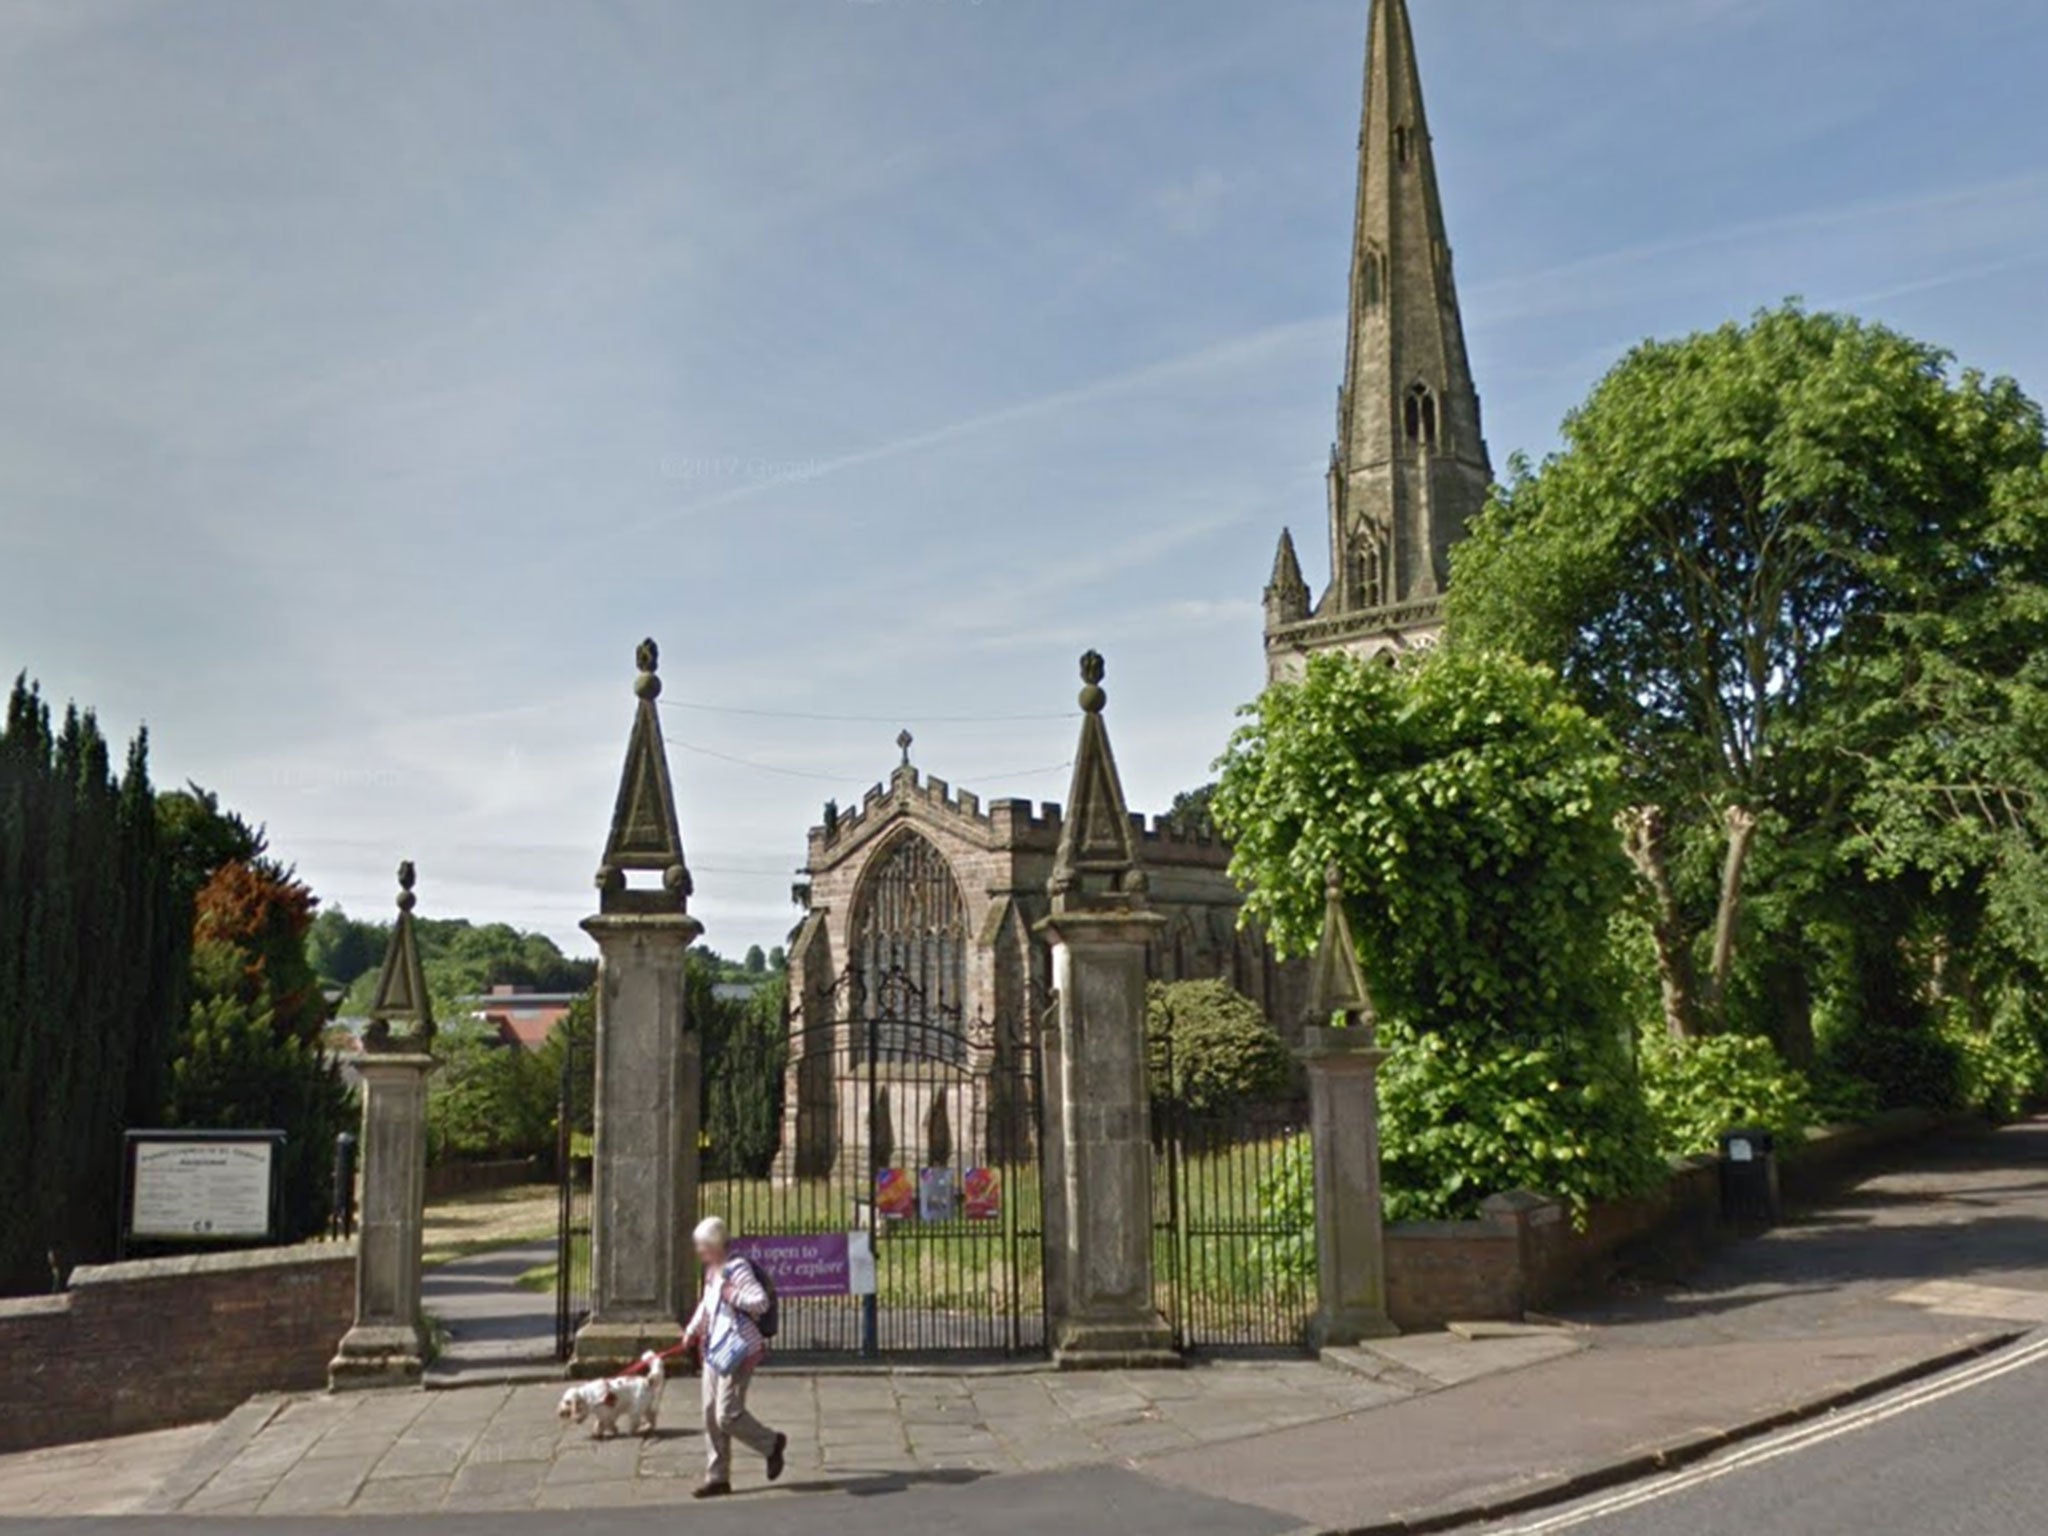 The victim (not pictured) was walking near St Oswald's church in Ashbourne, Derbyshire